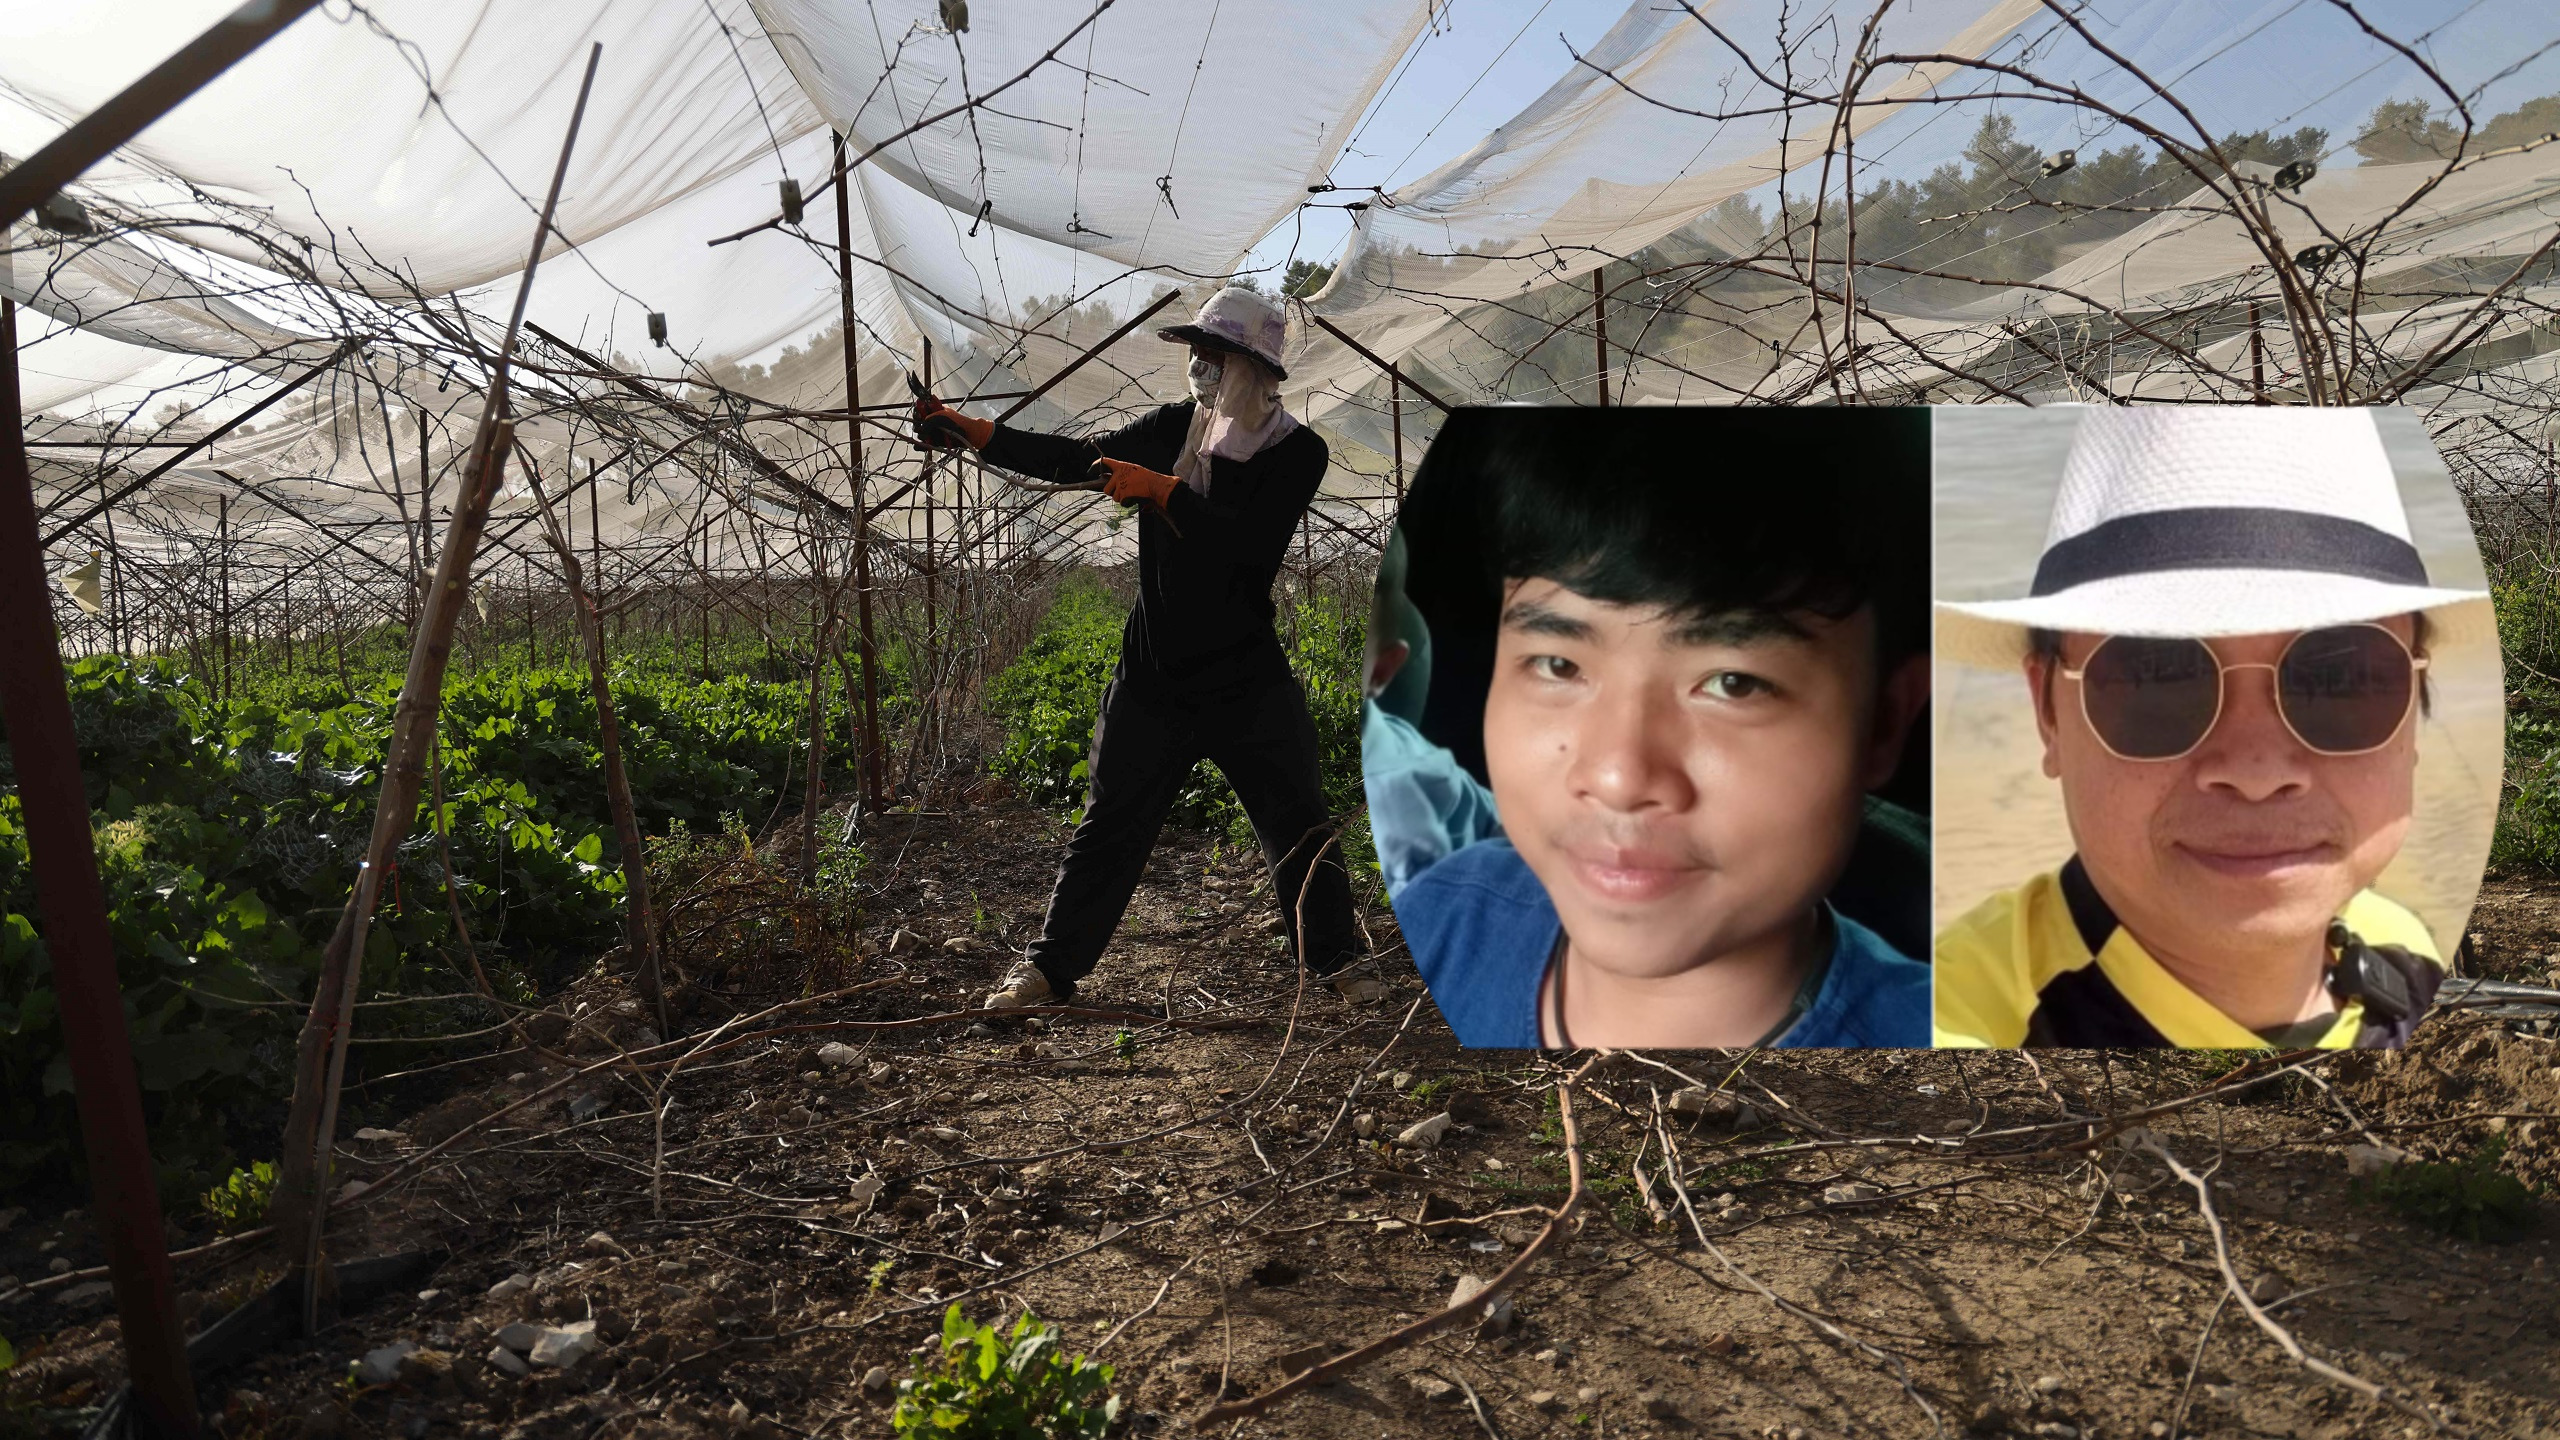 Thai Farmworkers Among Most Vulnerable in Israel to Hamas Rocket Fire